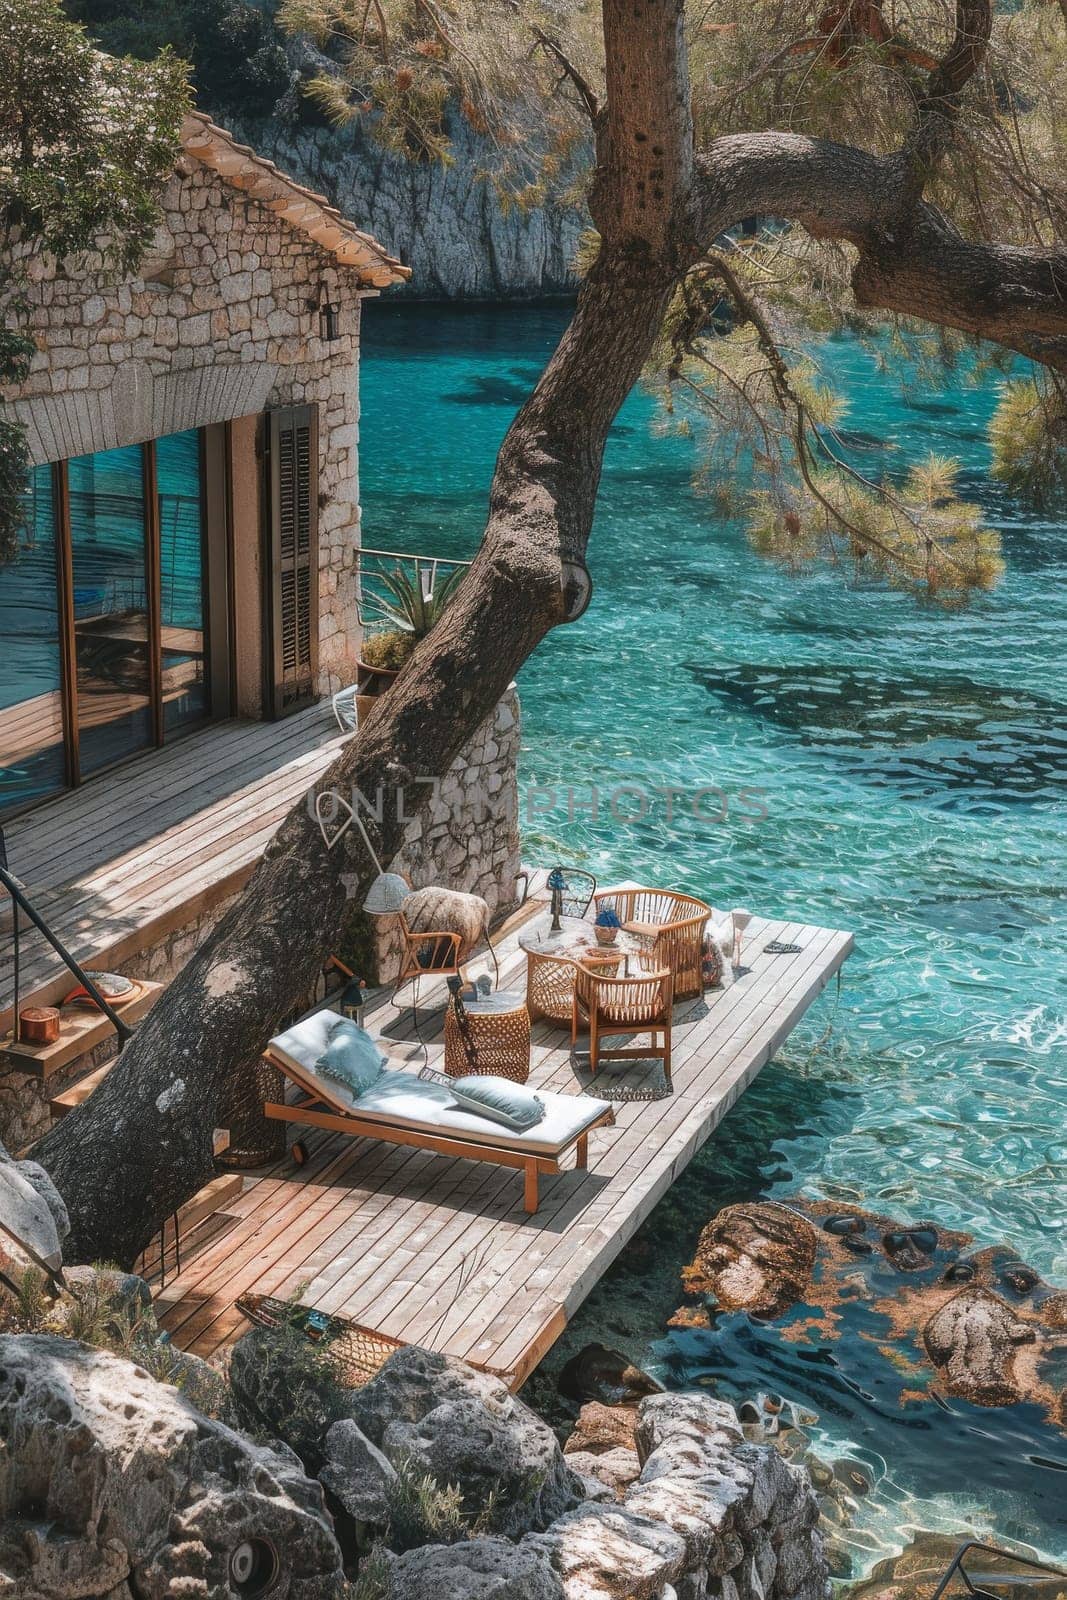 A beautiful beach house with a pool and a large body of water in the background. The water is crystal clear and the rocks surrounding the pool add to the serene atmosphere